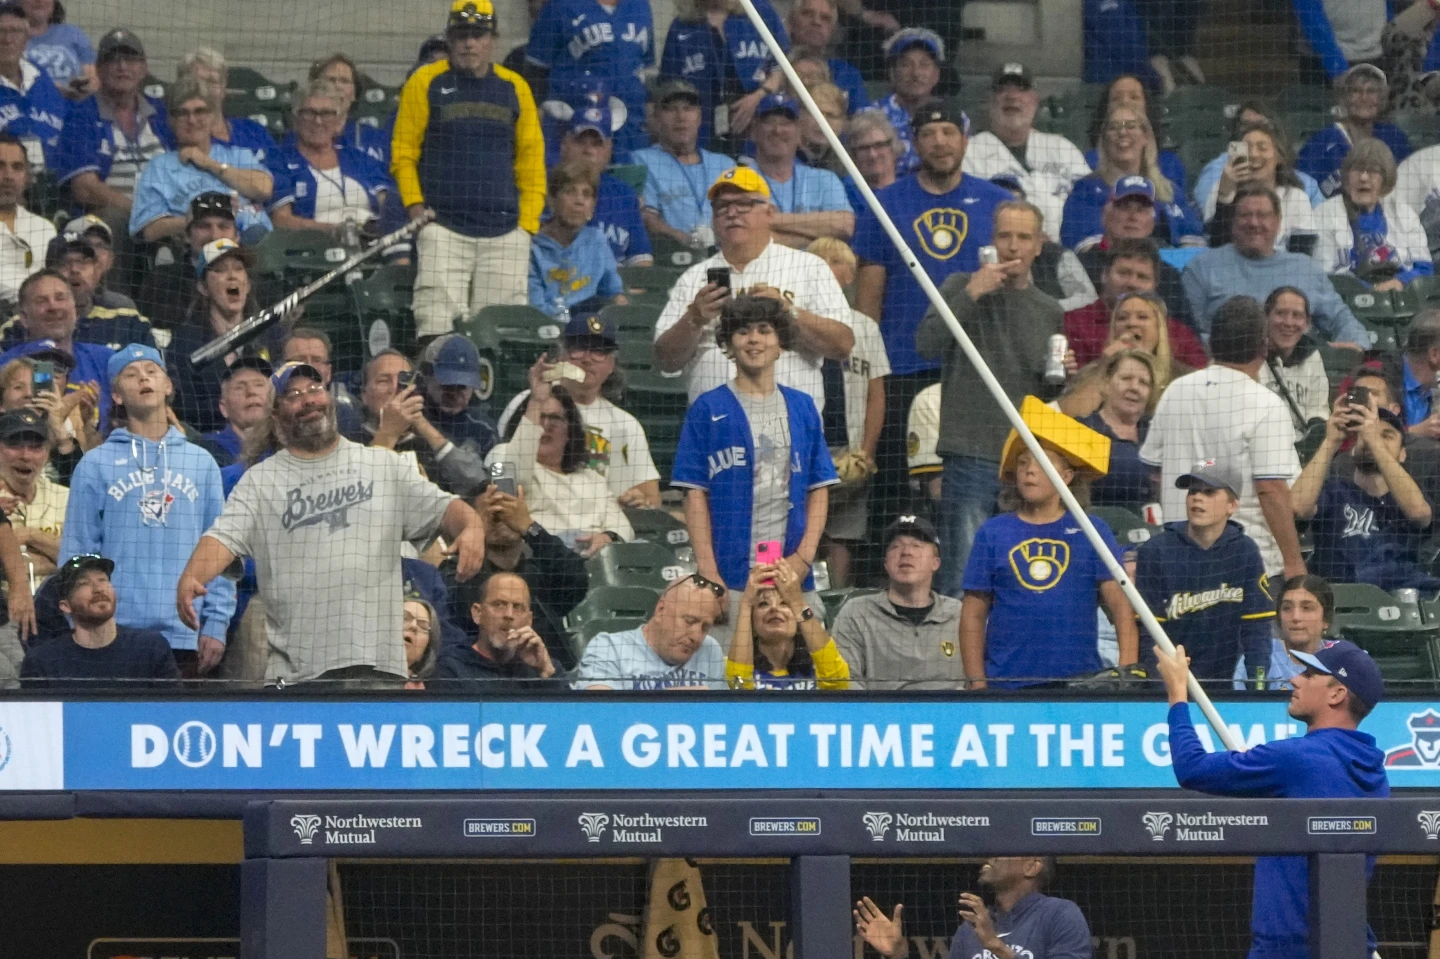 Bat flies, get stuck in net at Brewers game for 2 innings